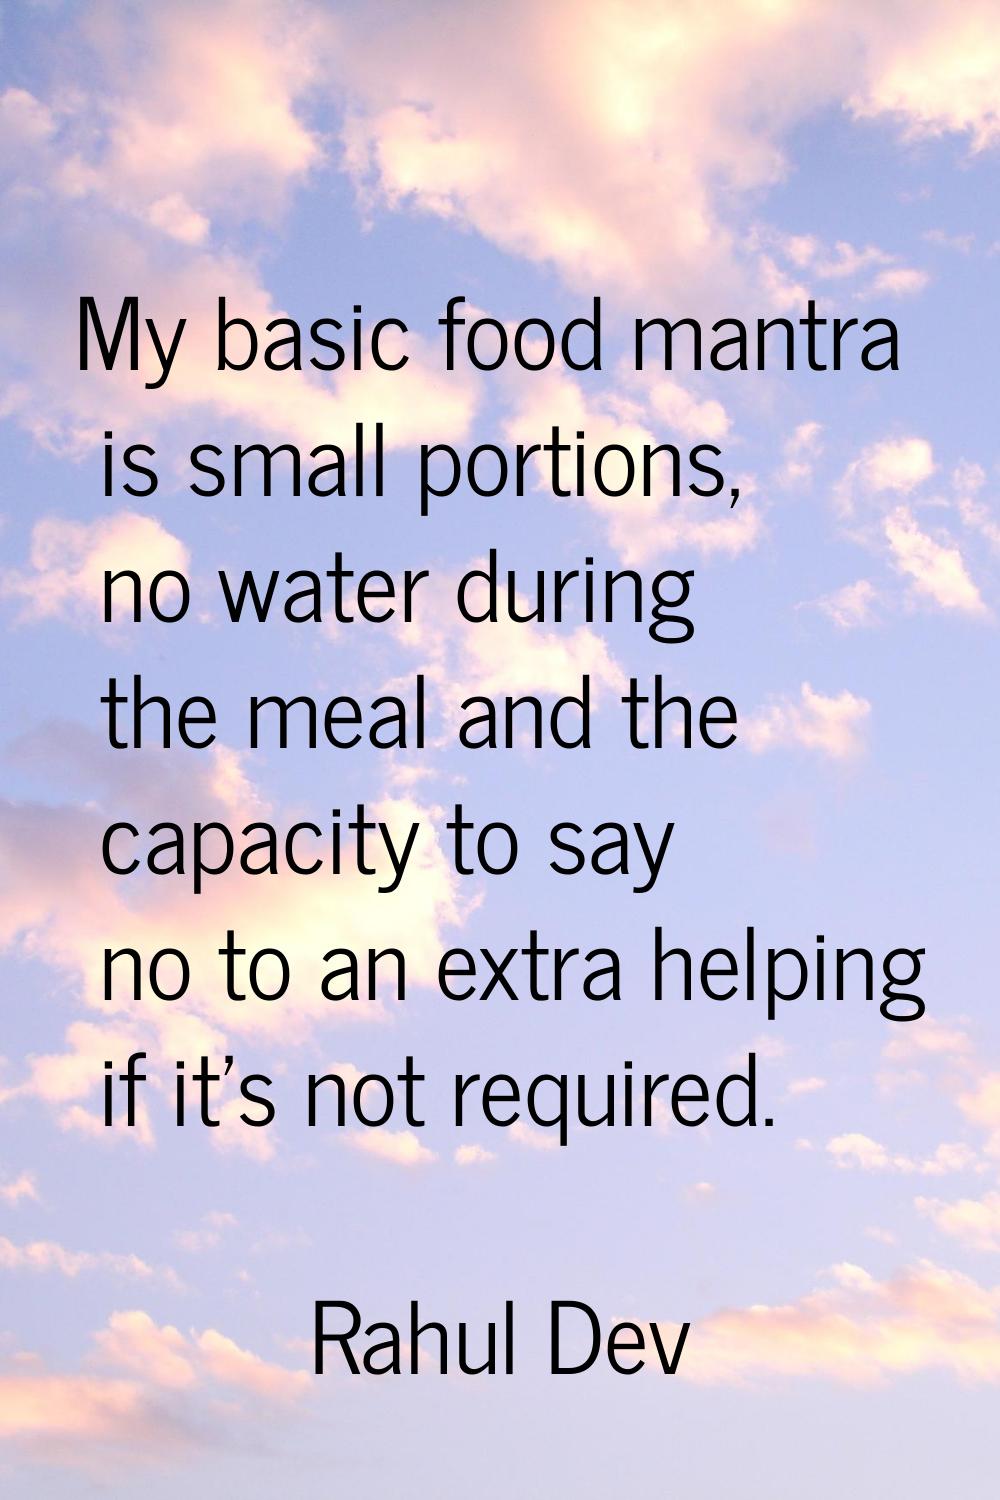 My basic food mantra is small portions, no water during the meal and the capacity to say no to an e